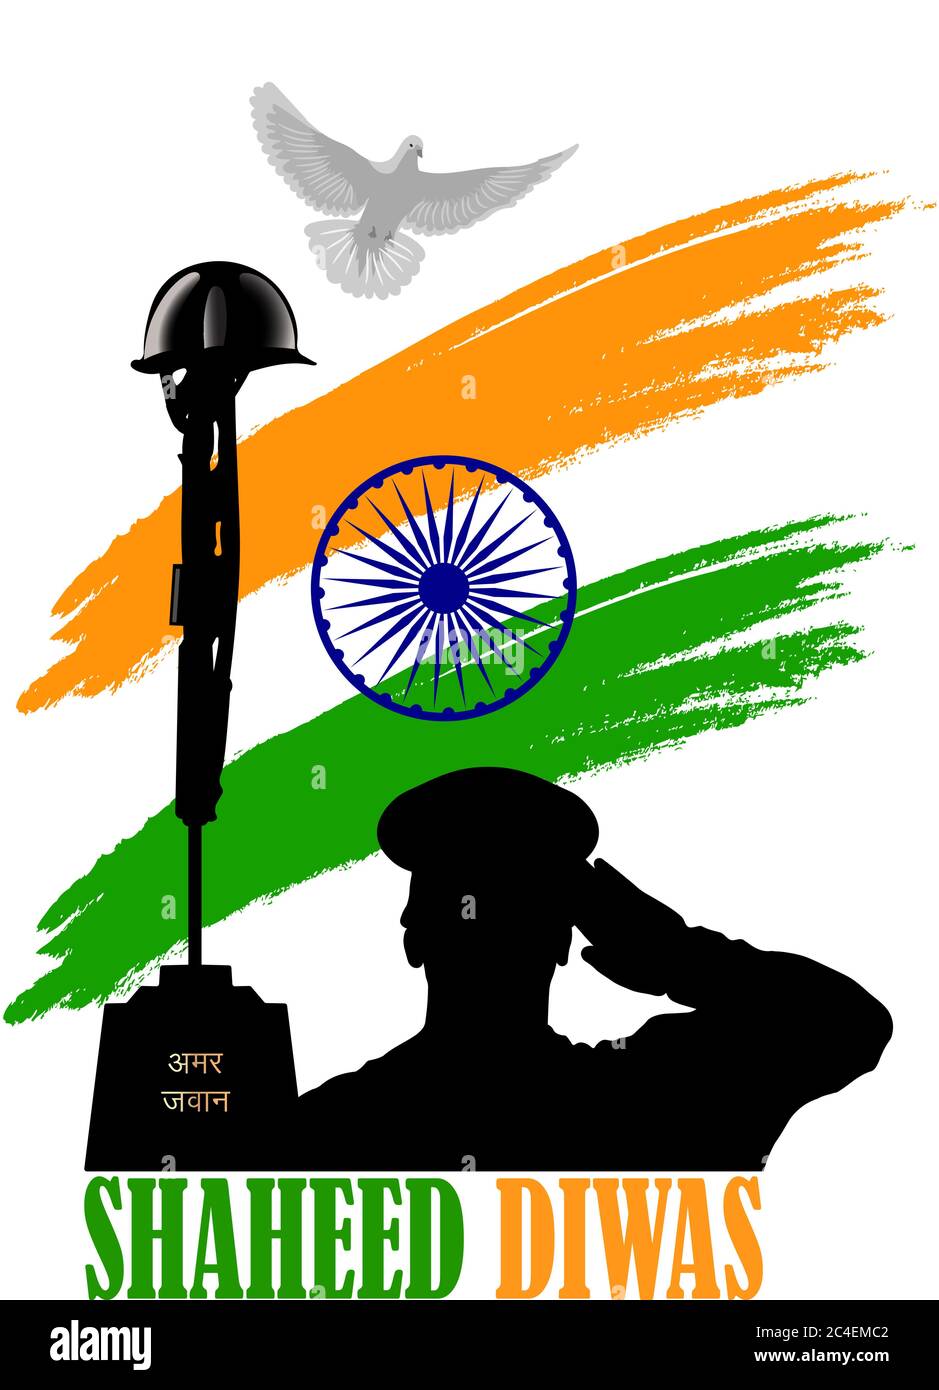 Vector Illustration of Shaheed Diwas. Commemoration day. Martyr's Day. Poster for salute indian army, amar jyoti, amar jawan. Stock Vector